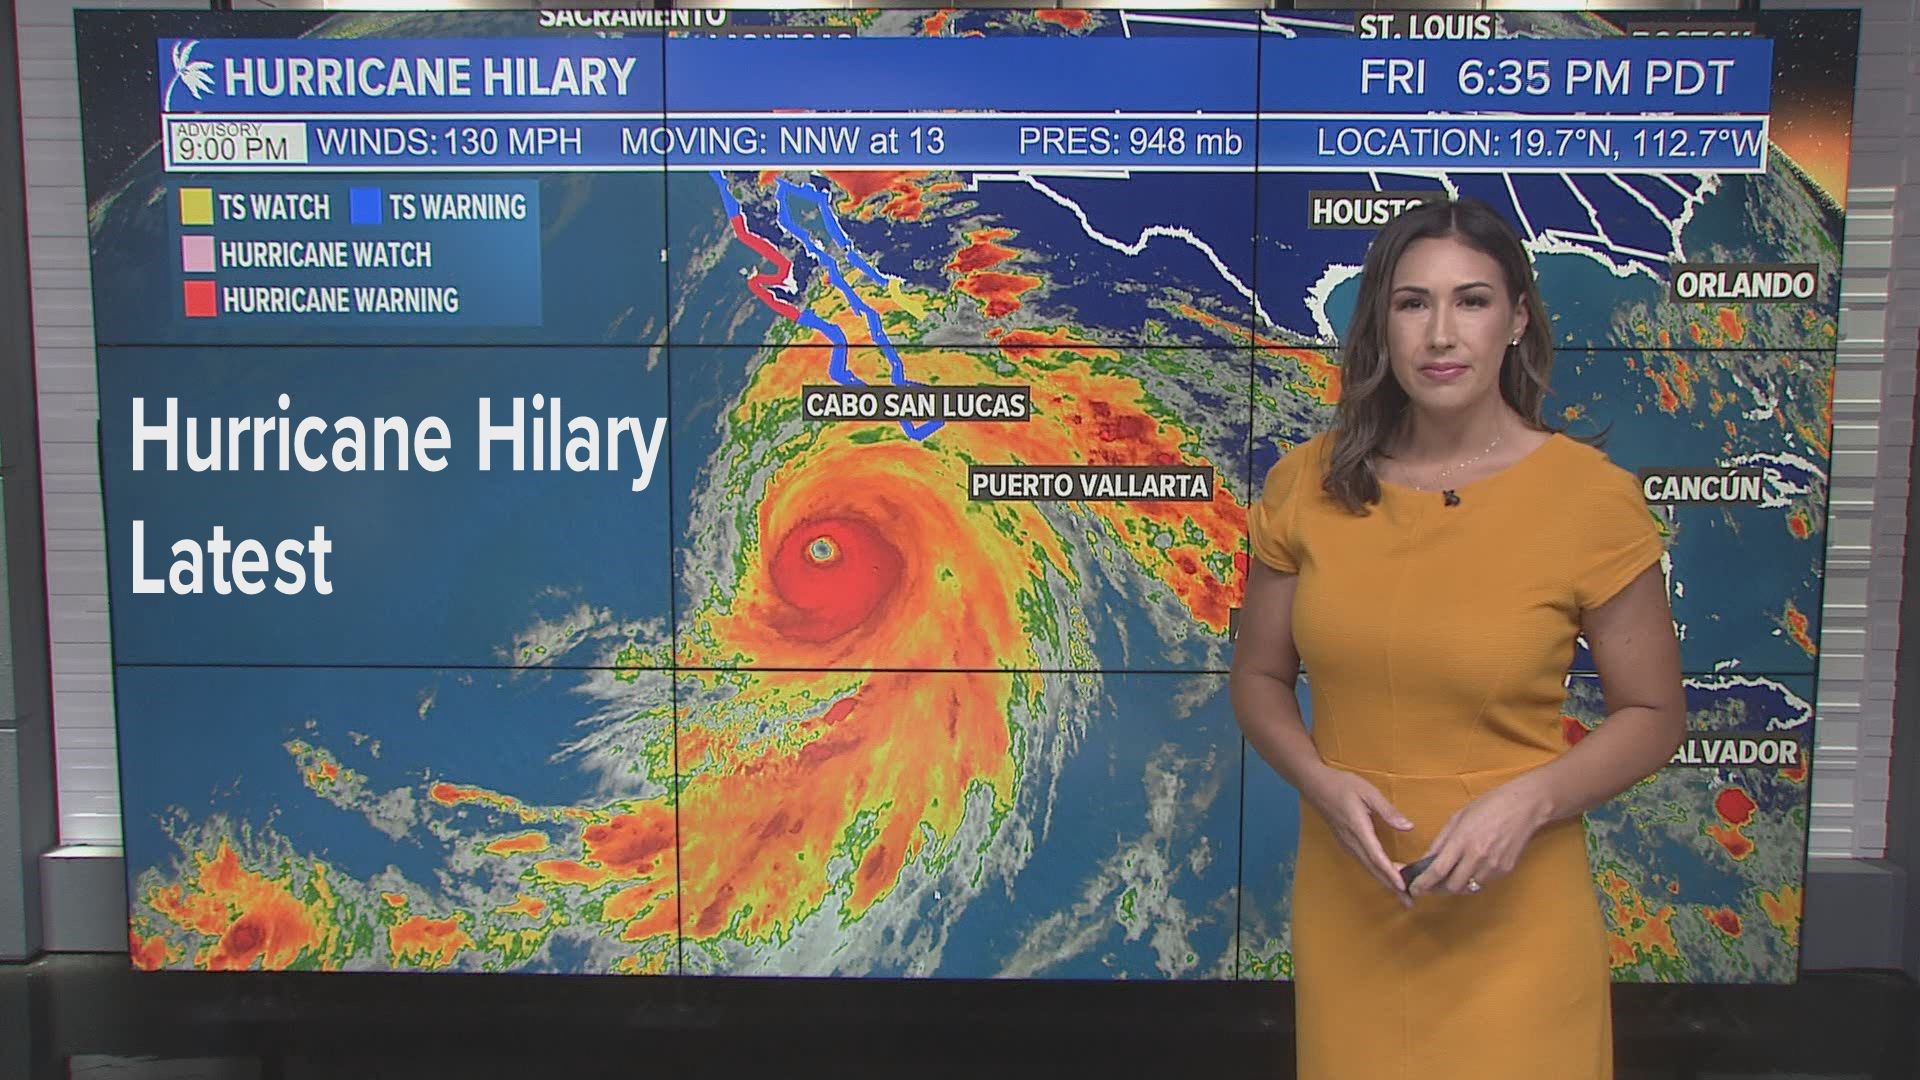 ABC10 meteorologist Carley Gomez gives an update on Category 4 Hurricane Hilary and the new warnings issued to the areas in its path as it nears California.